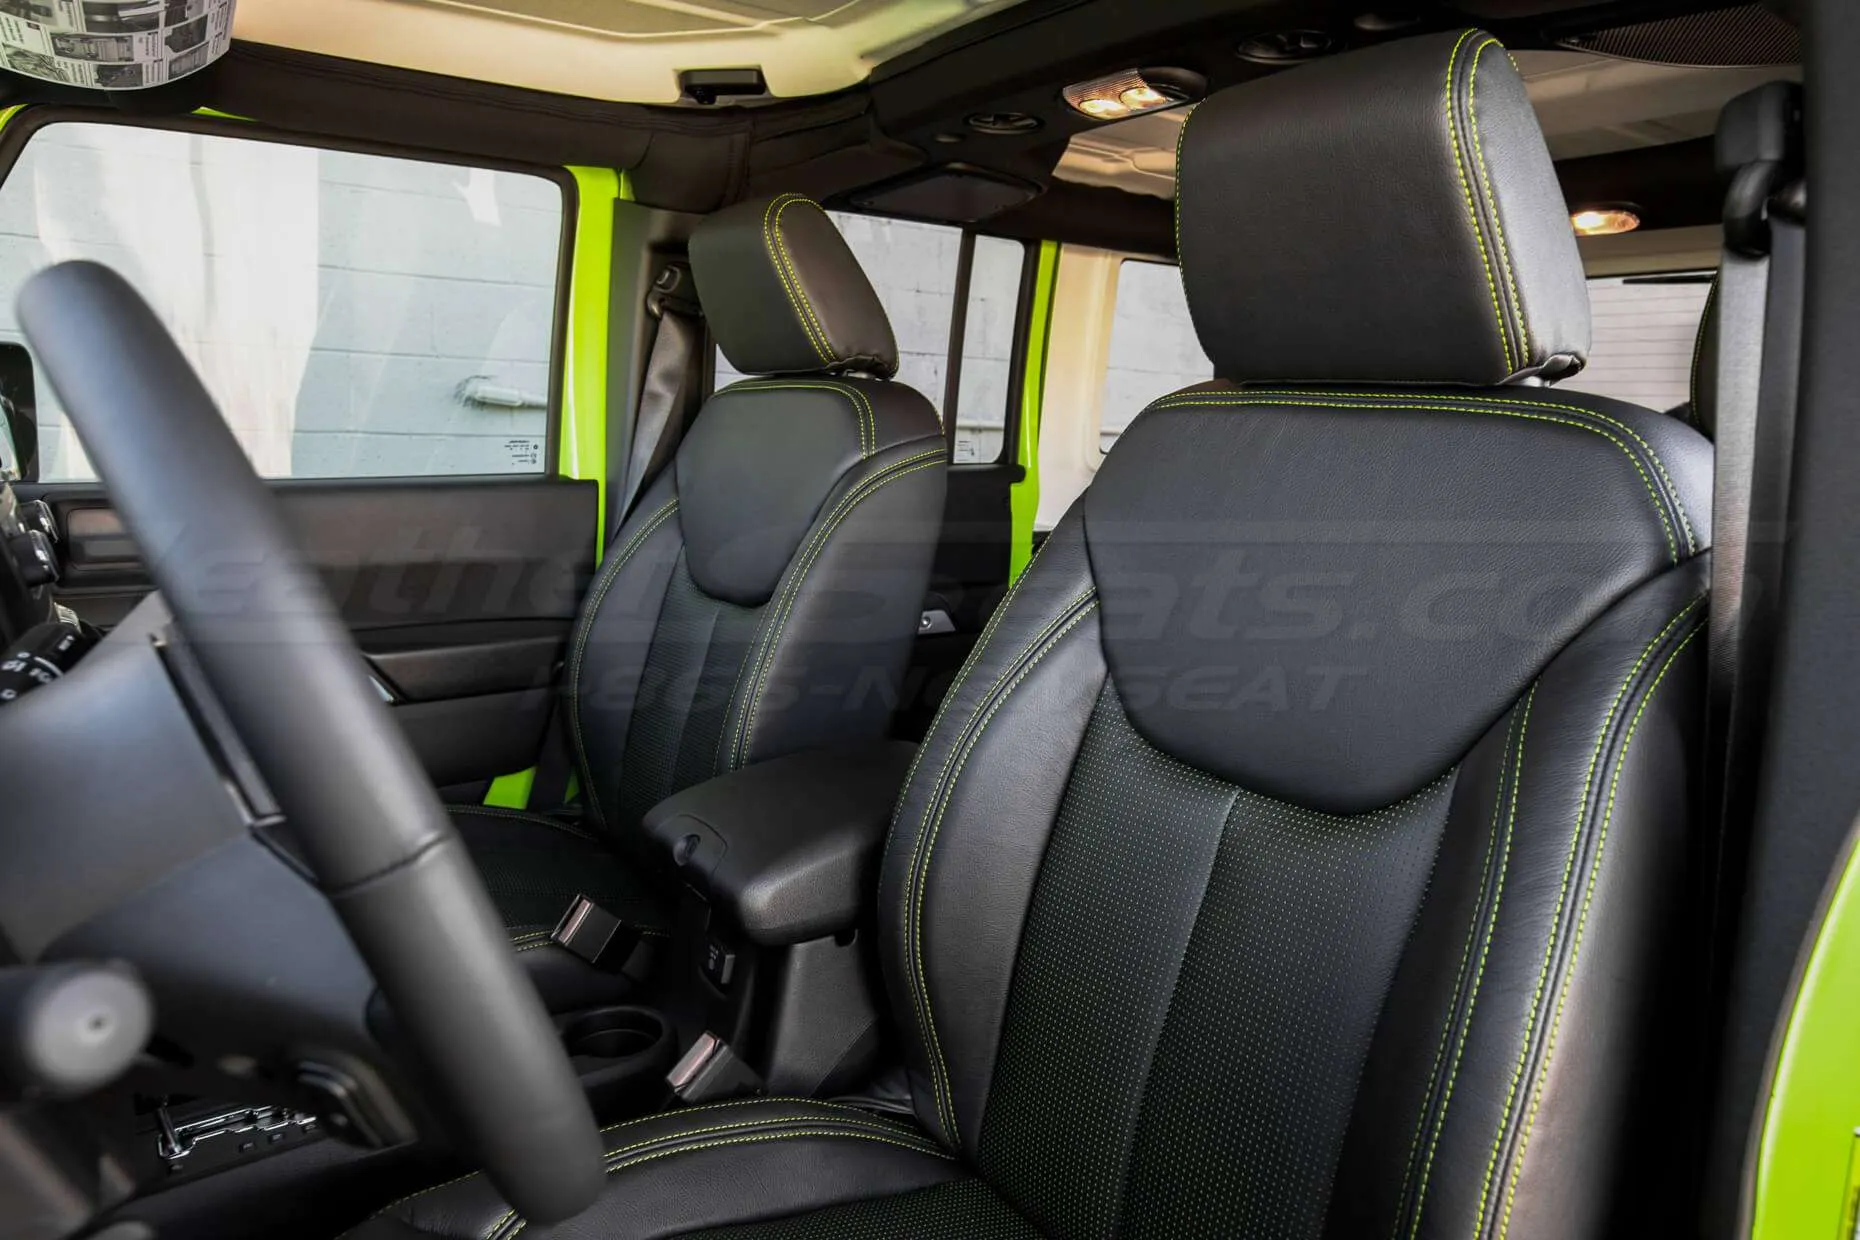 Jeep Wrangler Installed Leather Seats - Black & Piazza Green - Front backrest and headrest alternative angle